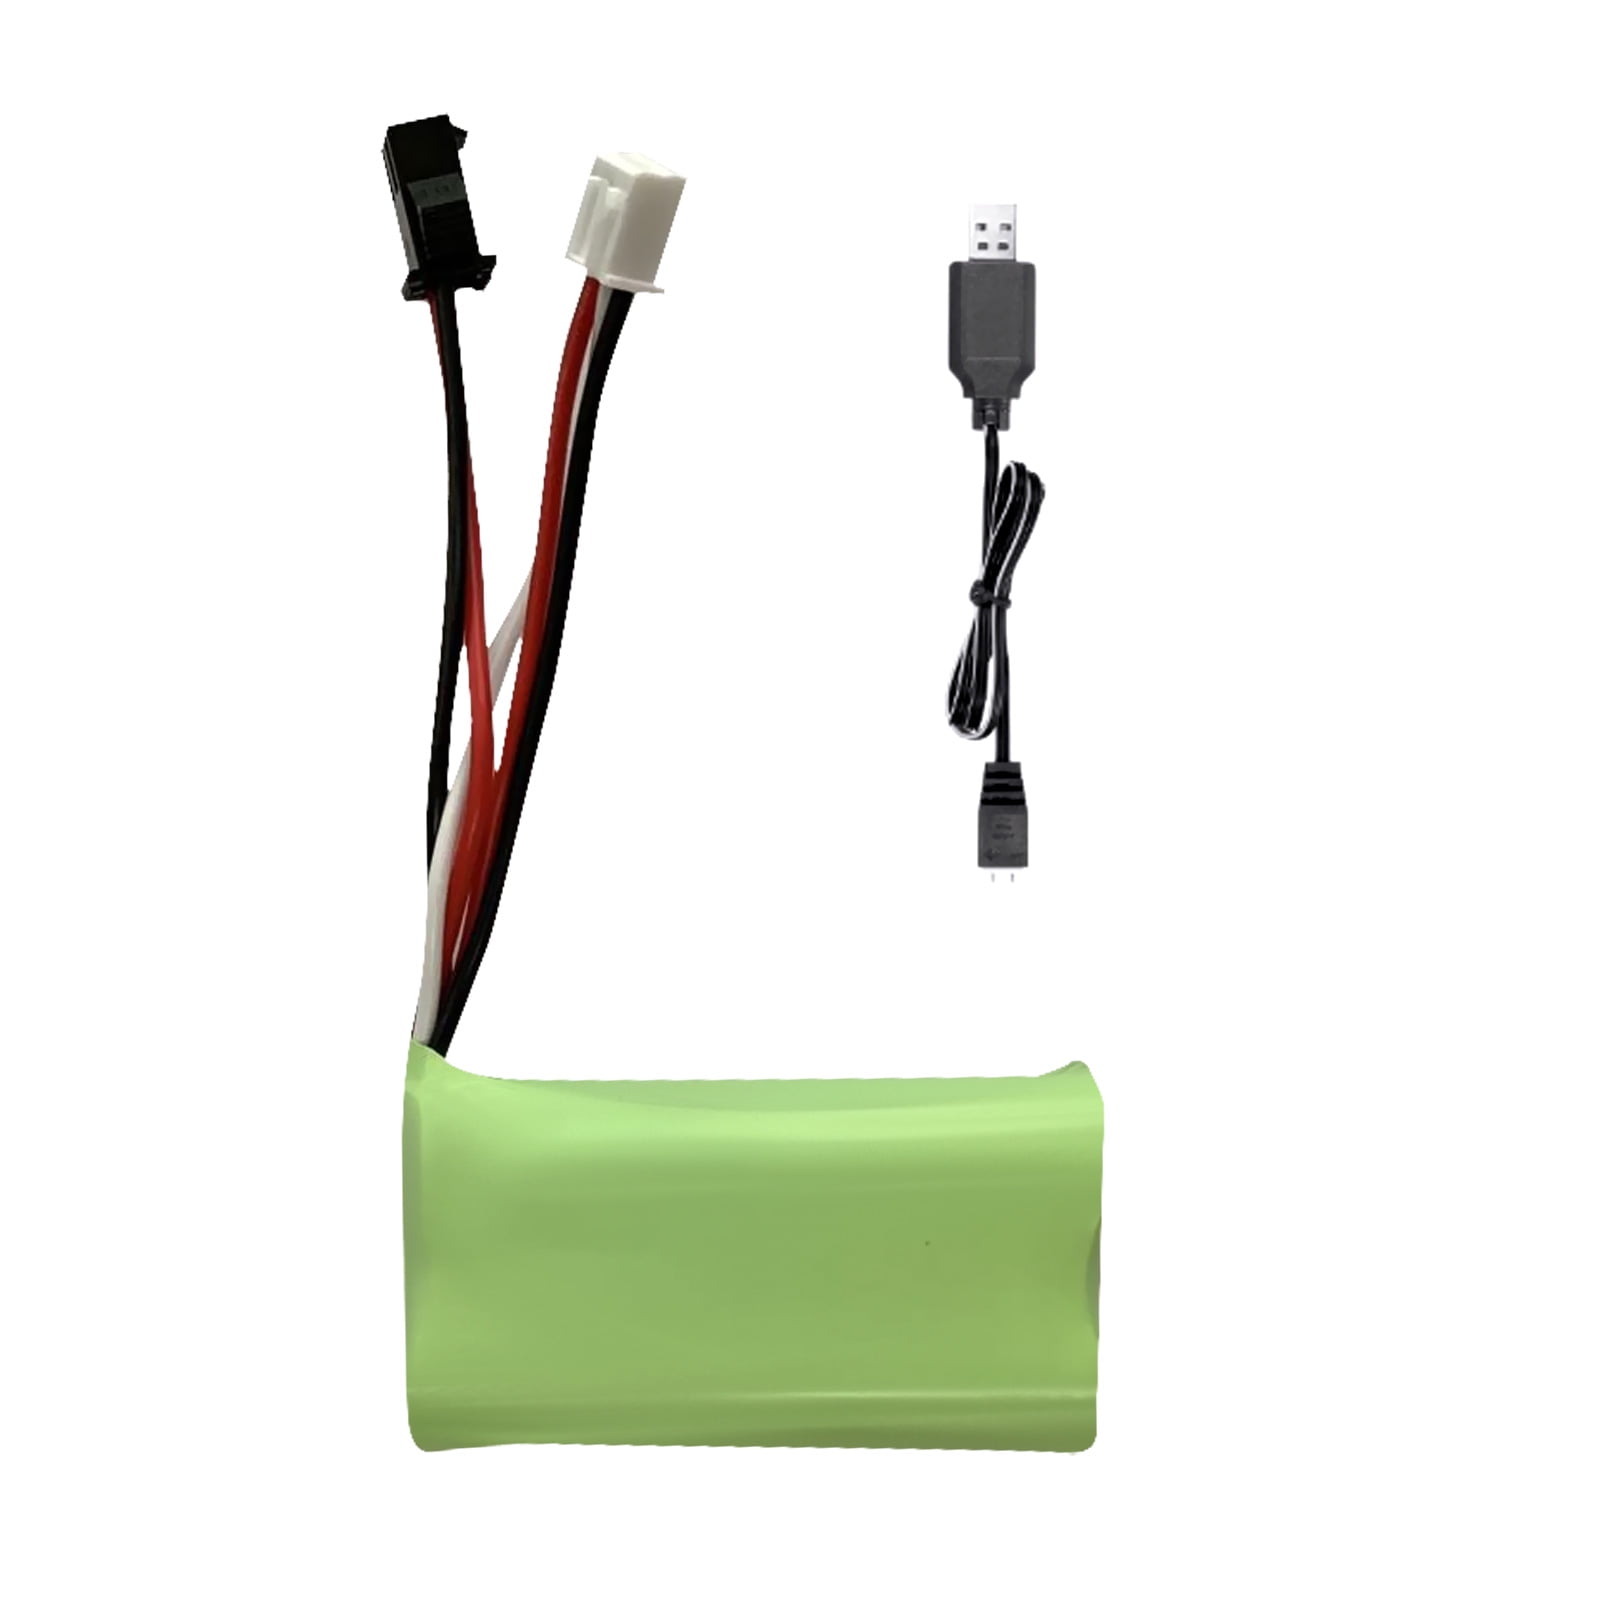 Original 7.4V Lithium Battery Charger USB Cable for 1/12 MN RC Car Series Parts 